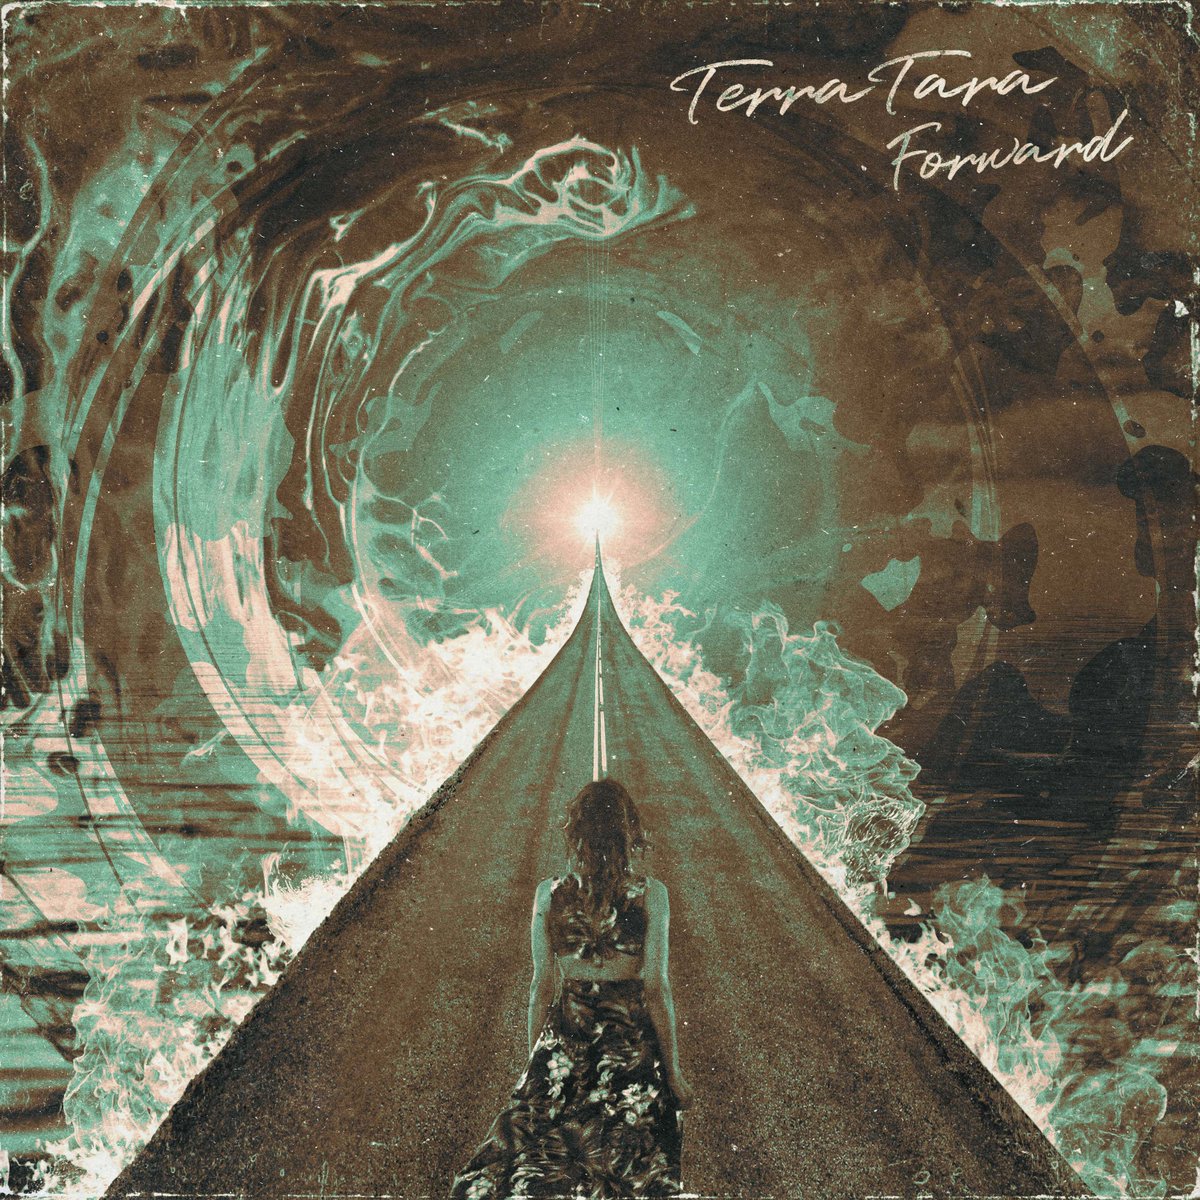 My new track, 'FORWARD' is OUT NOW on all streaming platforms!!! 💥 You can purchase the song through my Bandcamp or choose your streaming service: LINK IN BIO! #terrataramusic #newtrack #newrelease #femalevocals #femalemusician #singersongwriter #folk #folkreggae #reggaefolk